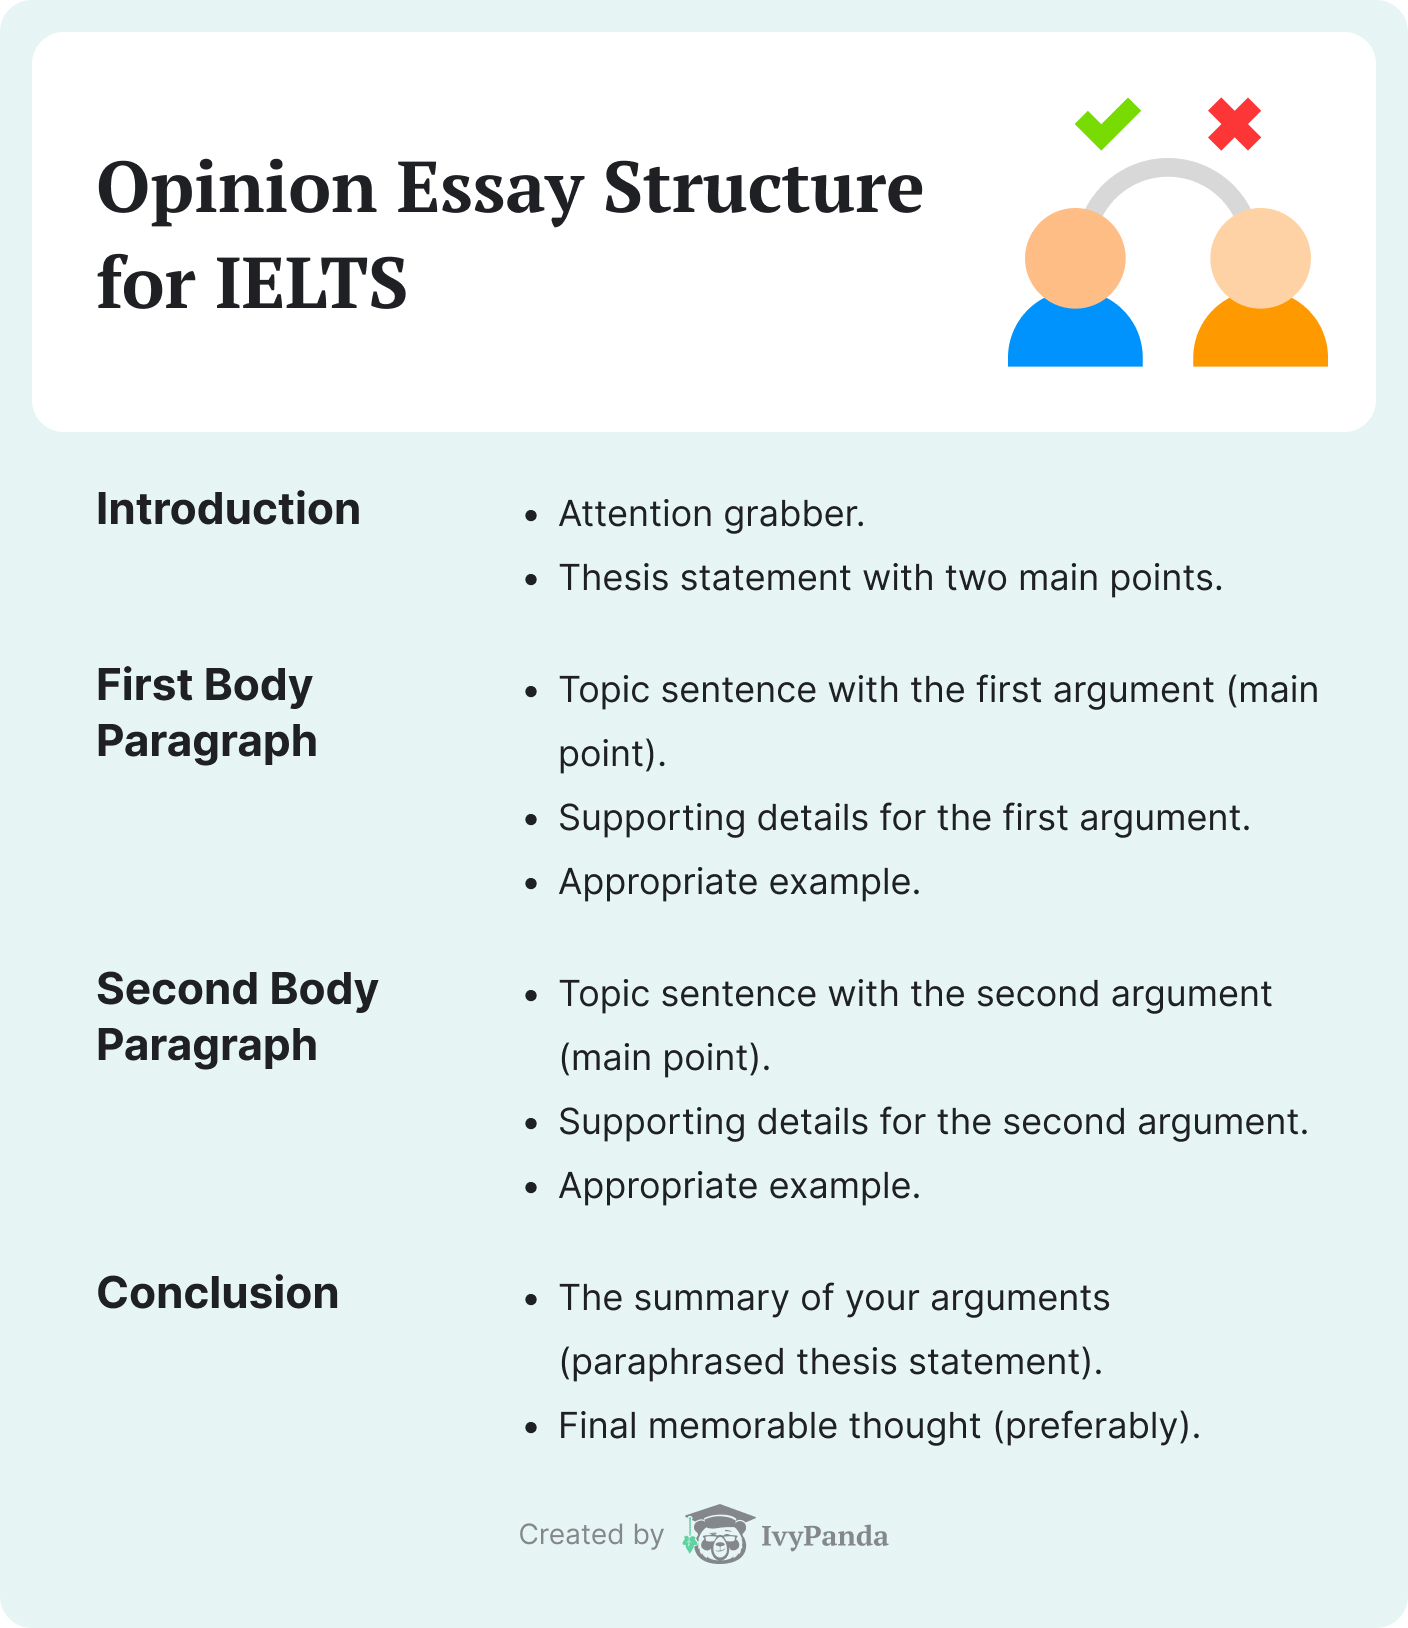 IELTS opinion essay structure.